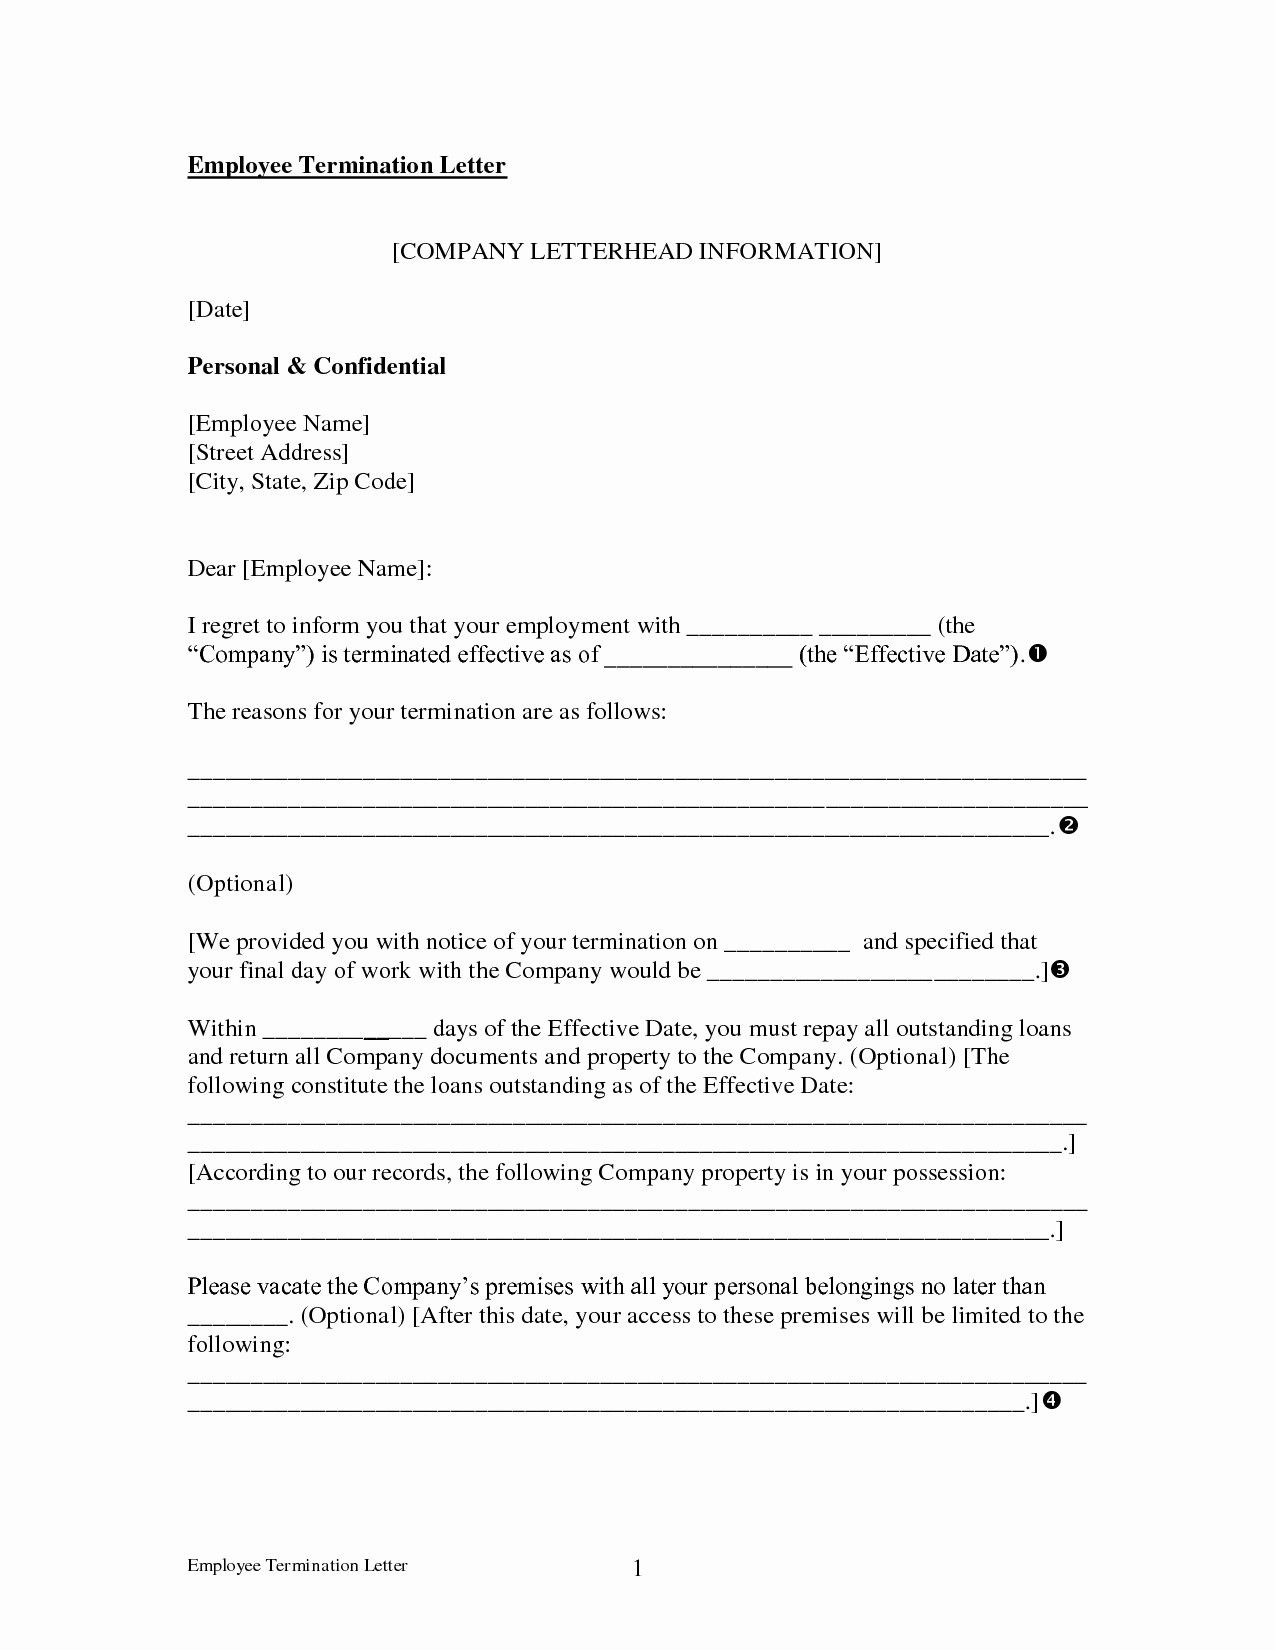 Sample Employee Termination Letter Template - Unique Termination Letter Template